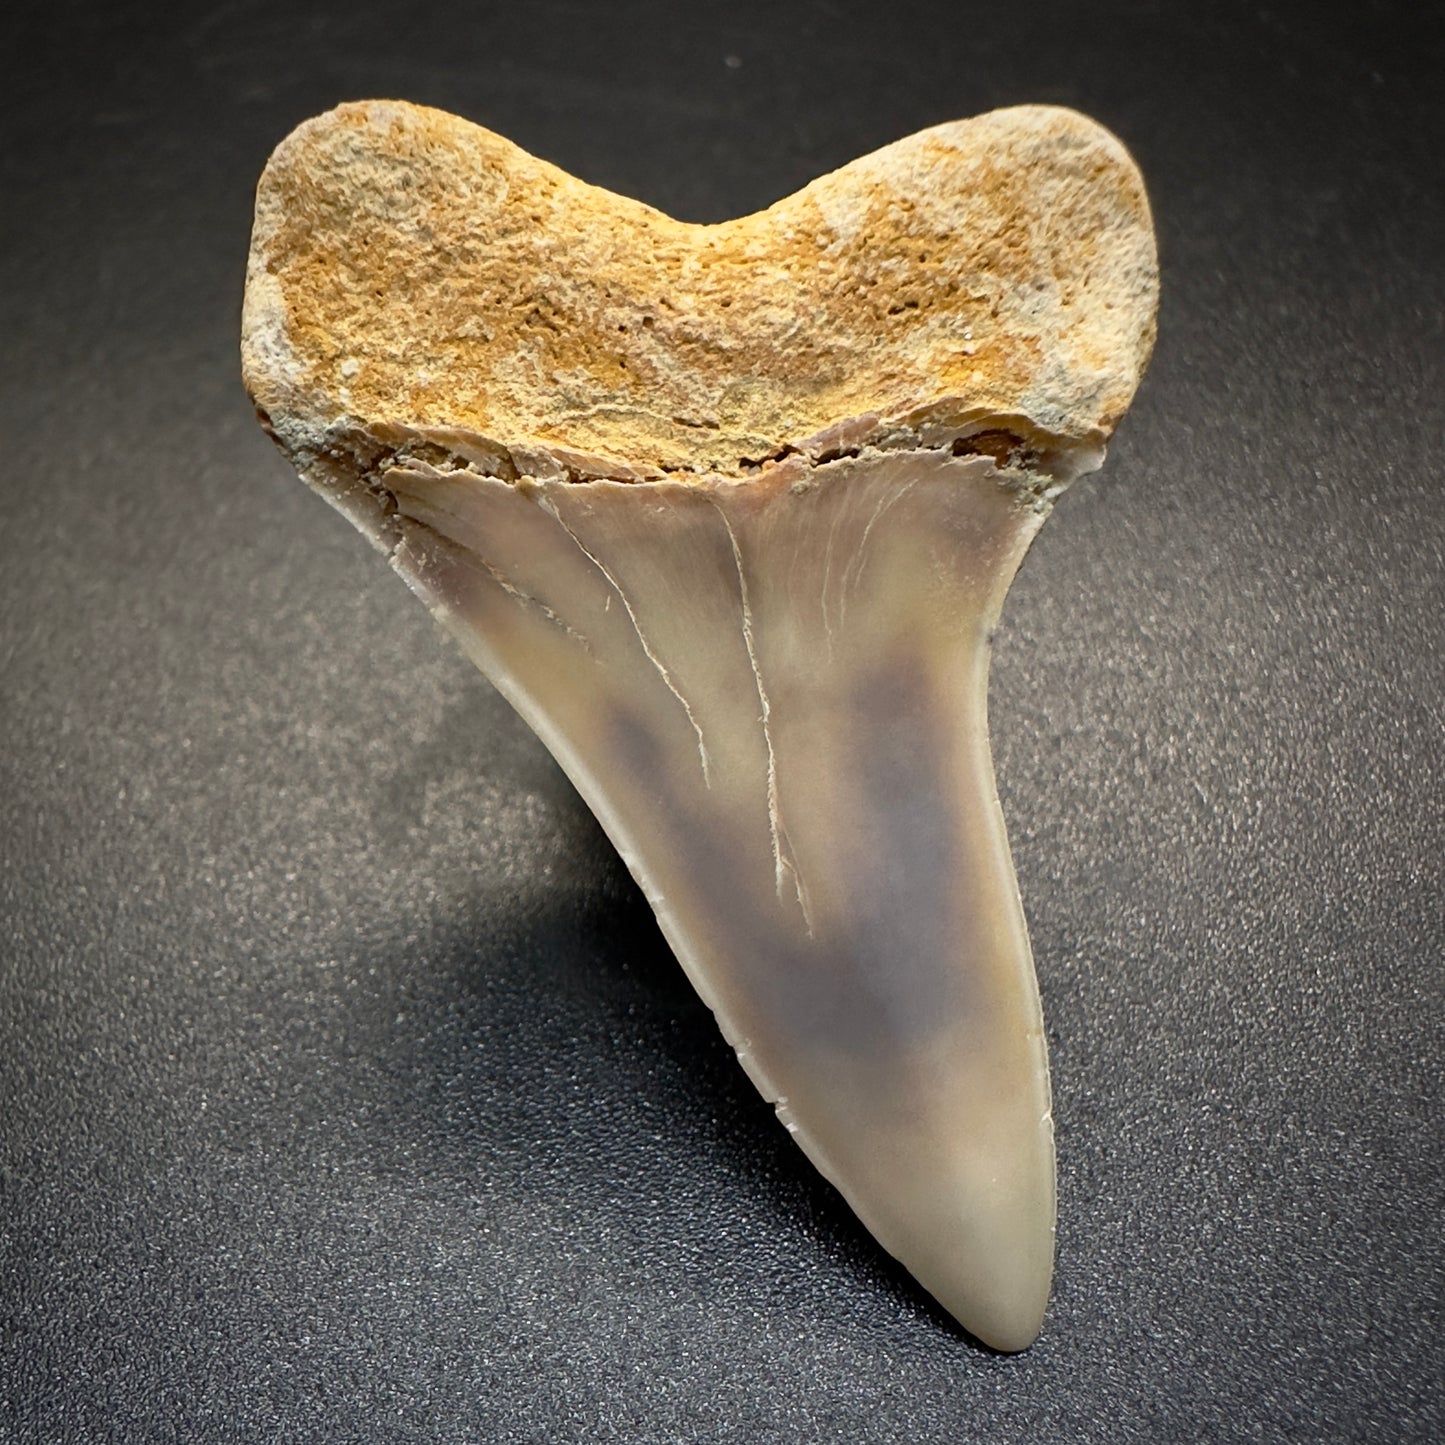 1.86 inches colorful Extinct Hooked-Tooth Mako - Isurus planus shark tooth from Bakersfield, California M503 back down